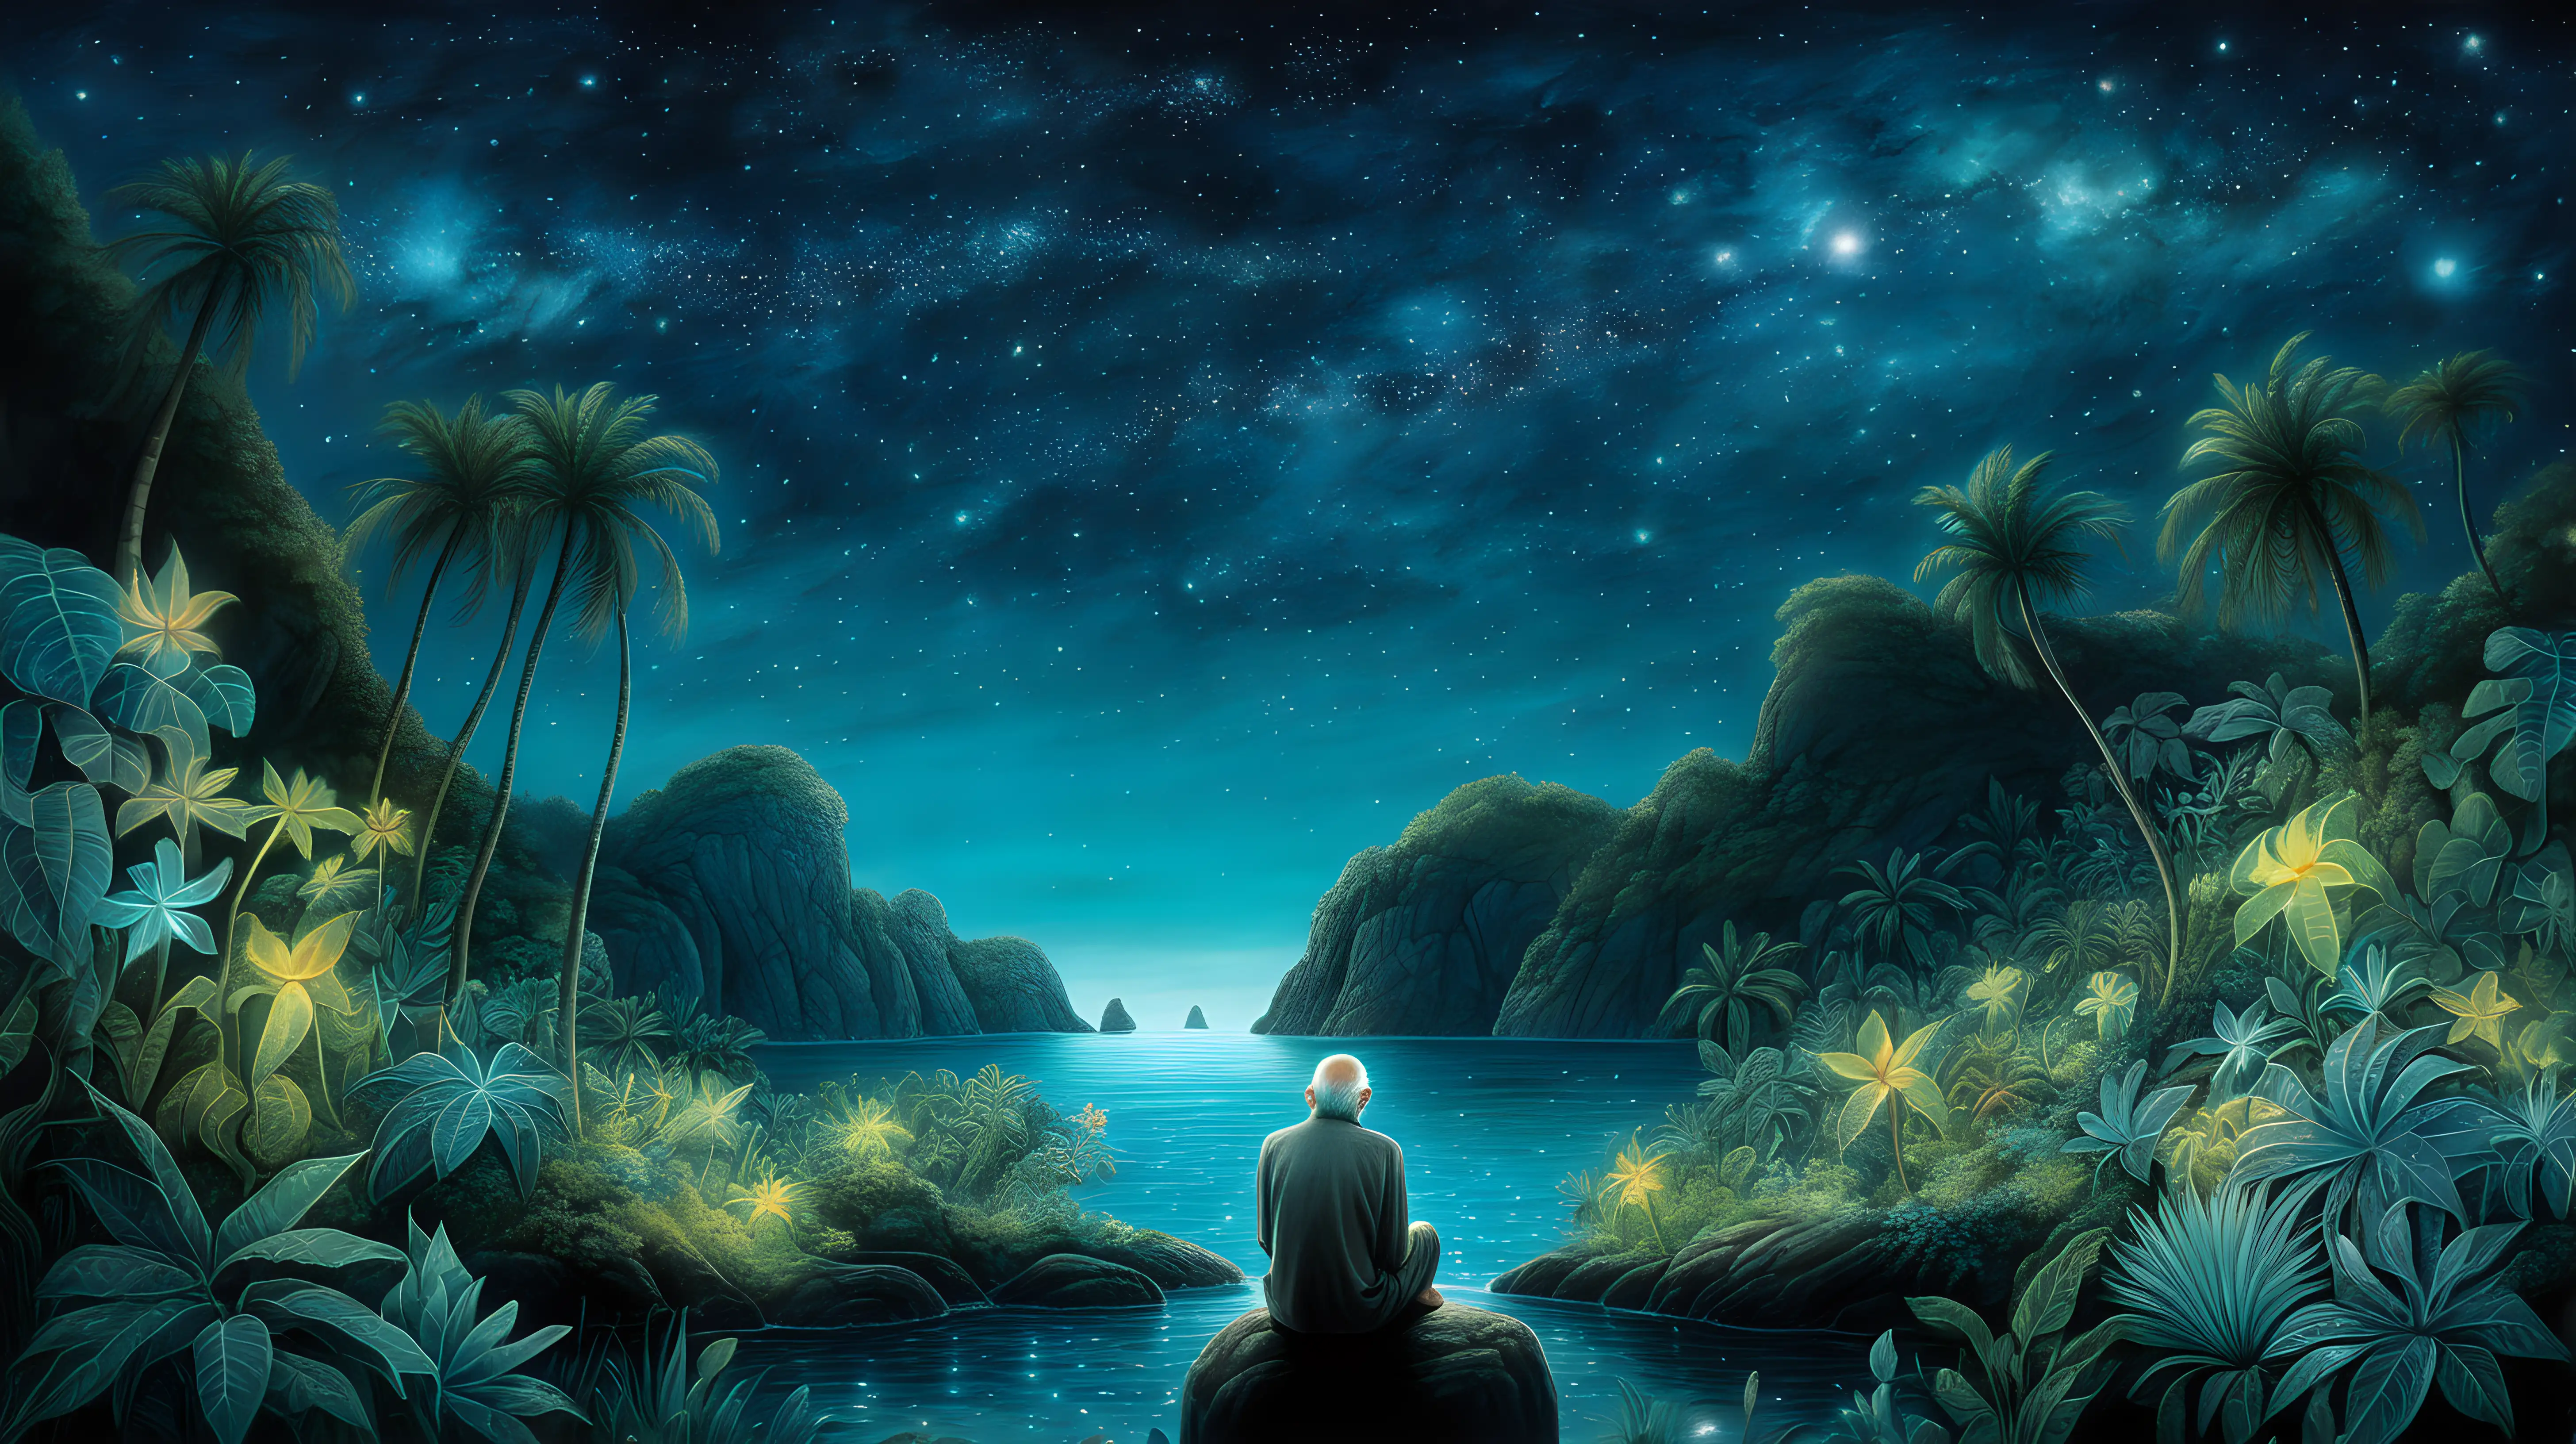 Contemplative Elder Surrounded by Bioluminescent Jungle at Night